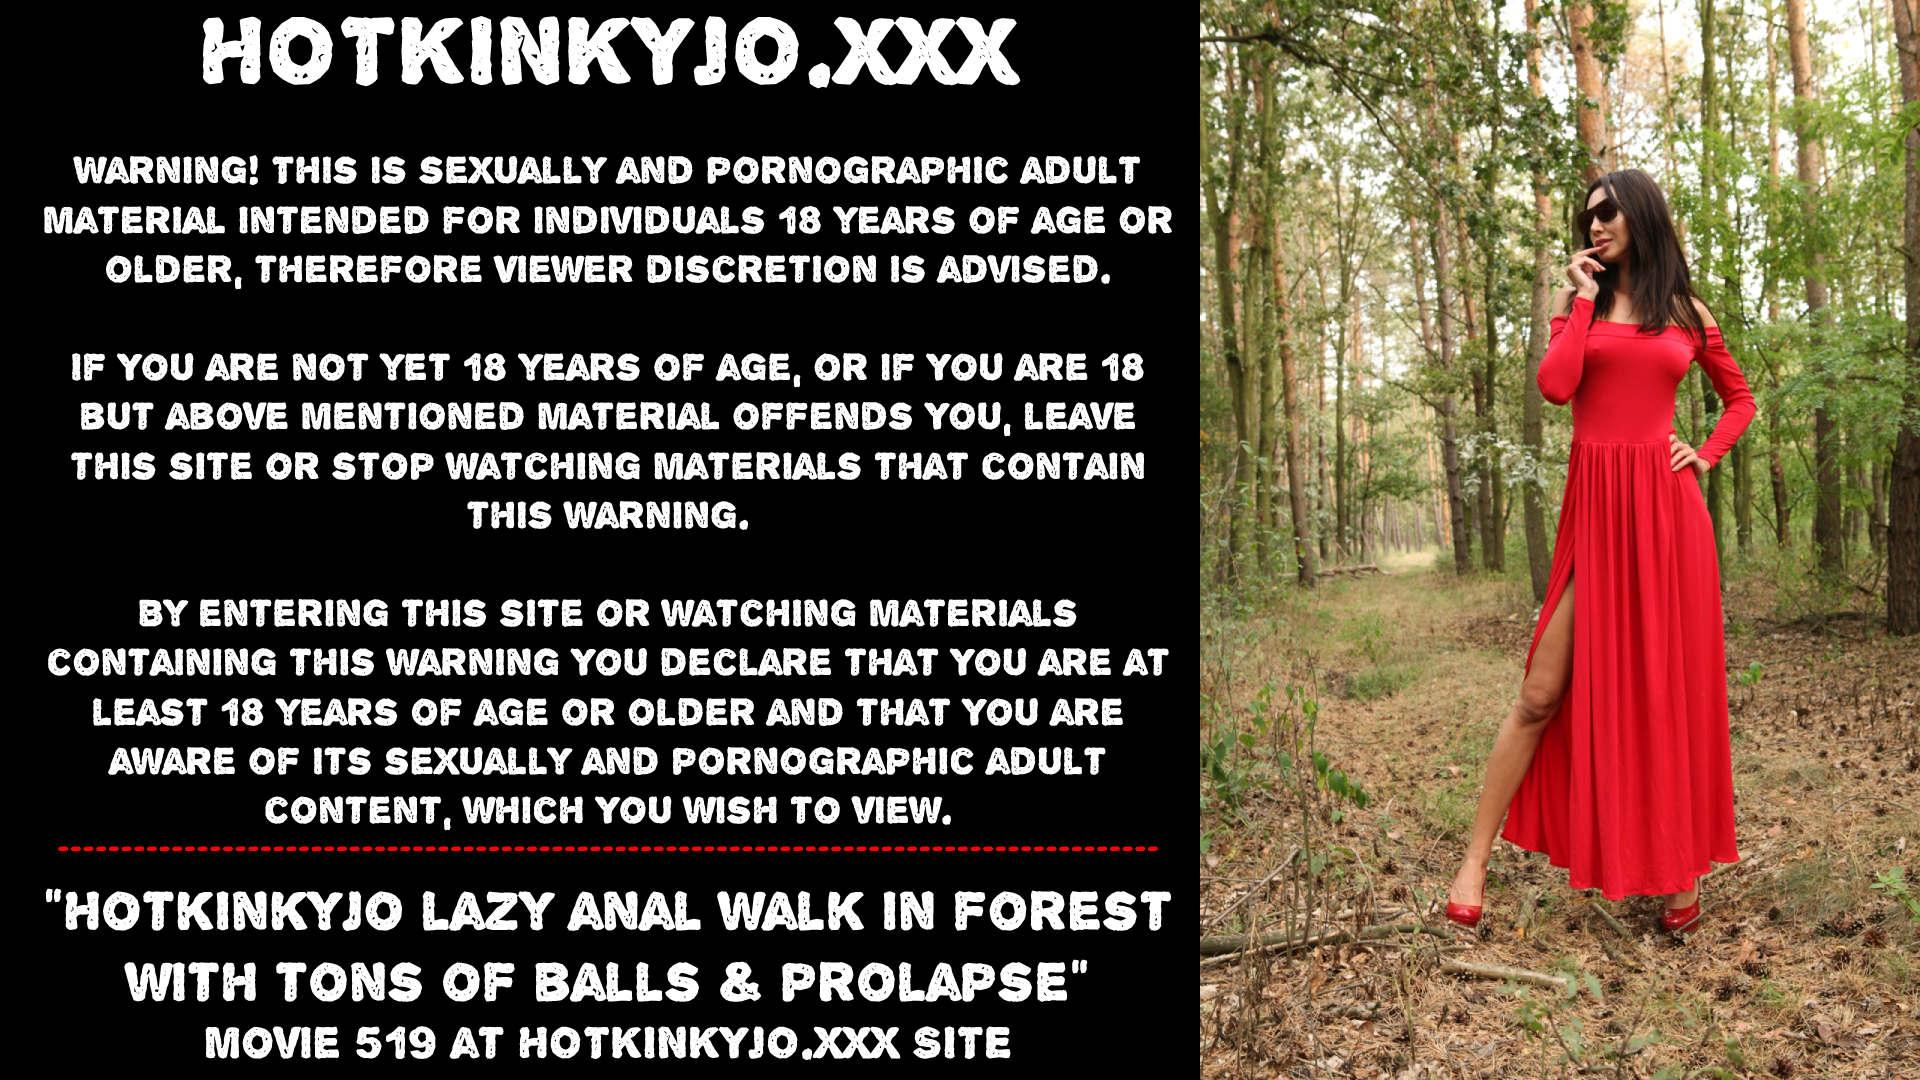 Hotkinkyjo lazy anal walk in forest with tons of balls